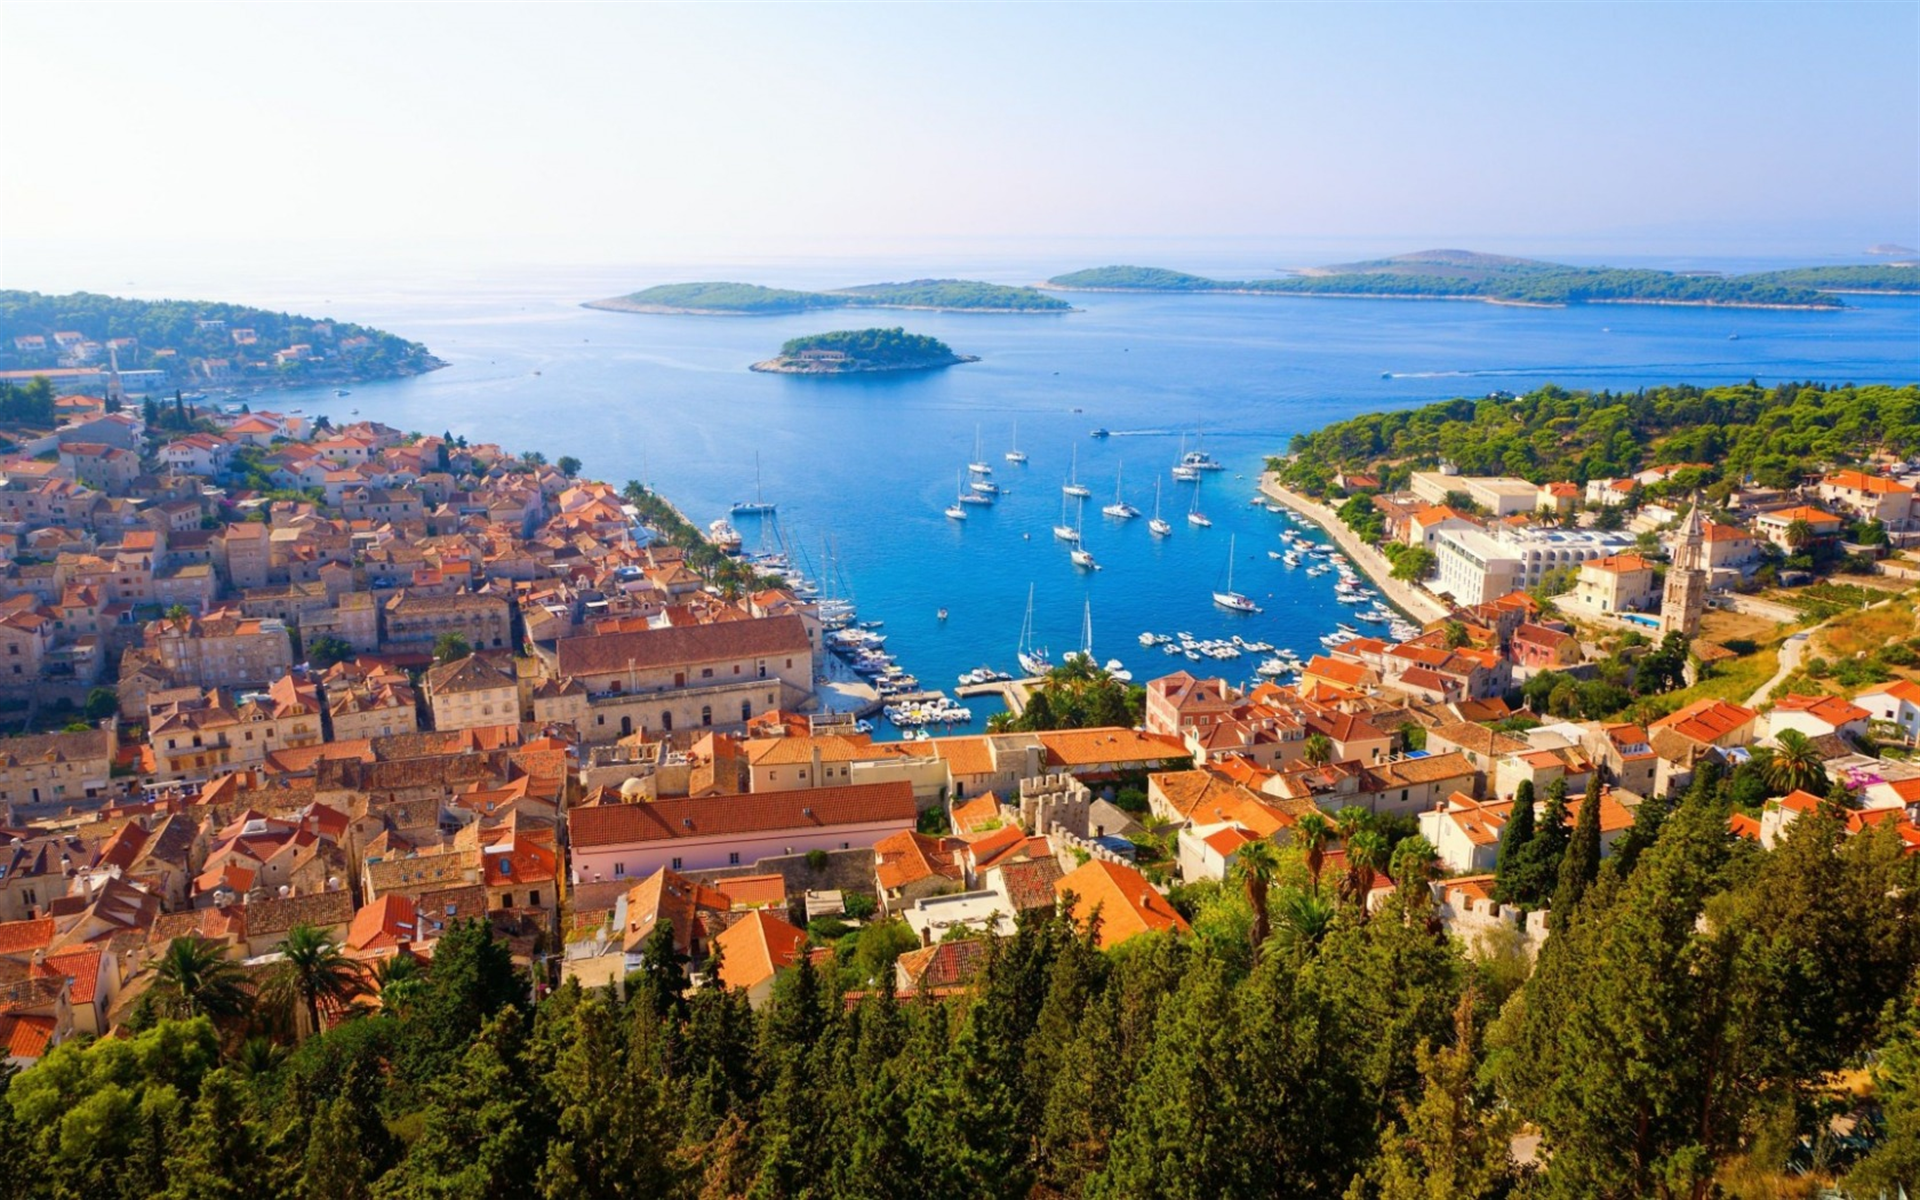 Download wallpaper Hvar, resort city, Croatia, summer travel, Adriatic Sea for desktop with resolution 1920x1200. High Quality HD picture wallpaper